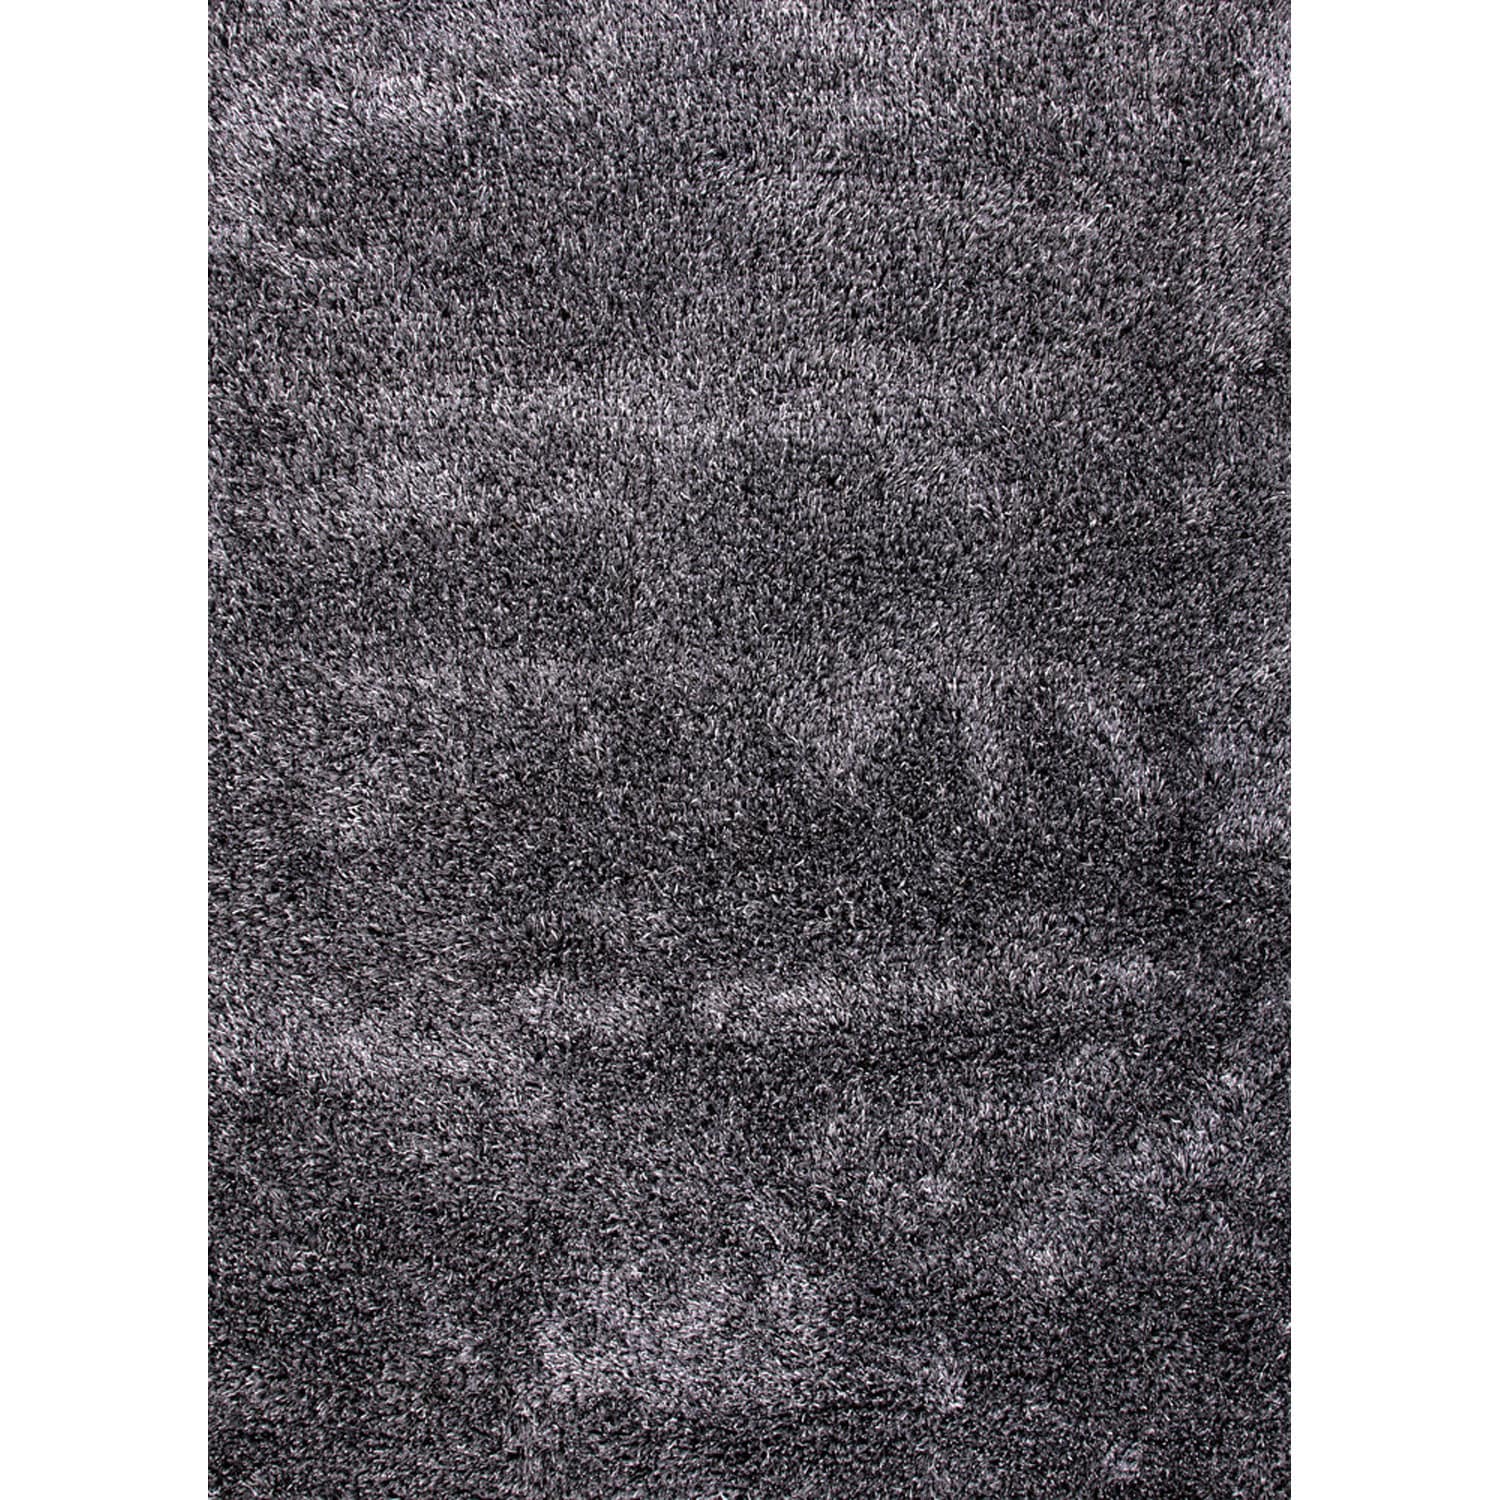 Hand woven Shags Solid Pattern Gray/ Black Rug (5 X 8)